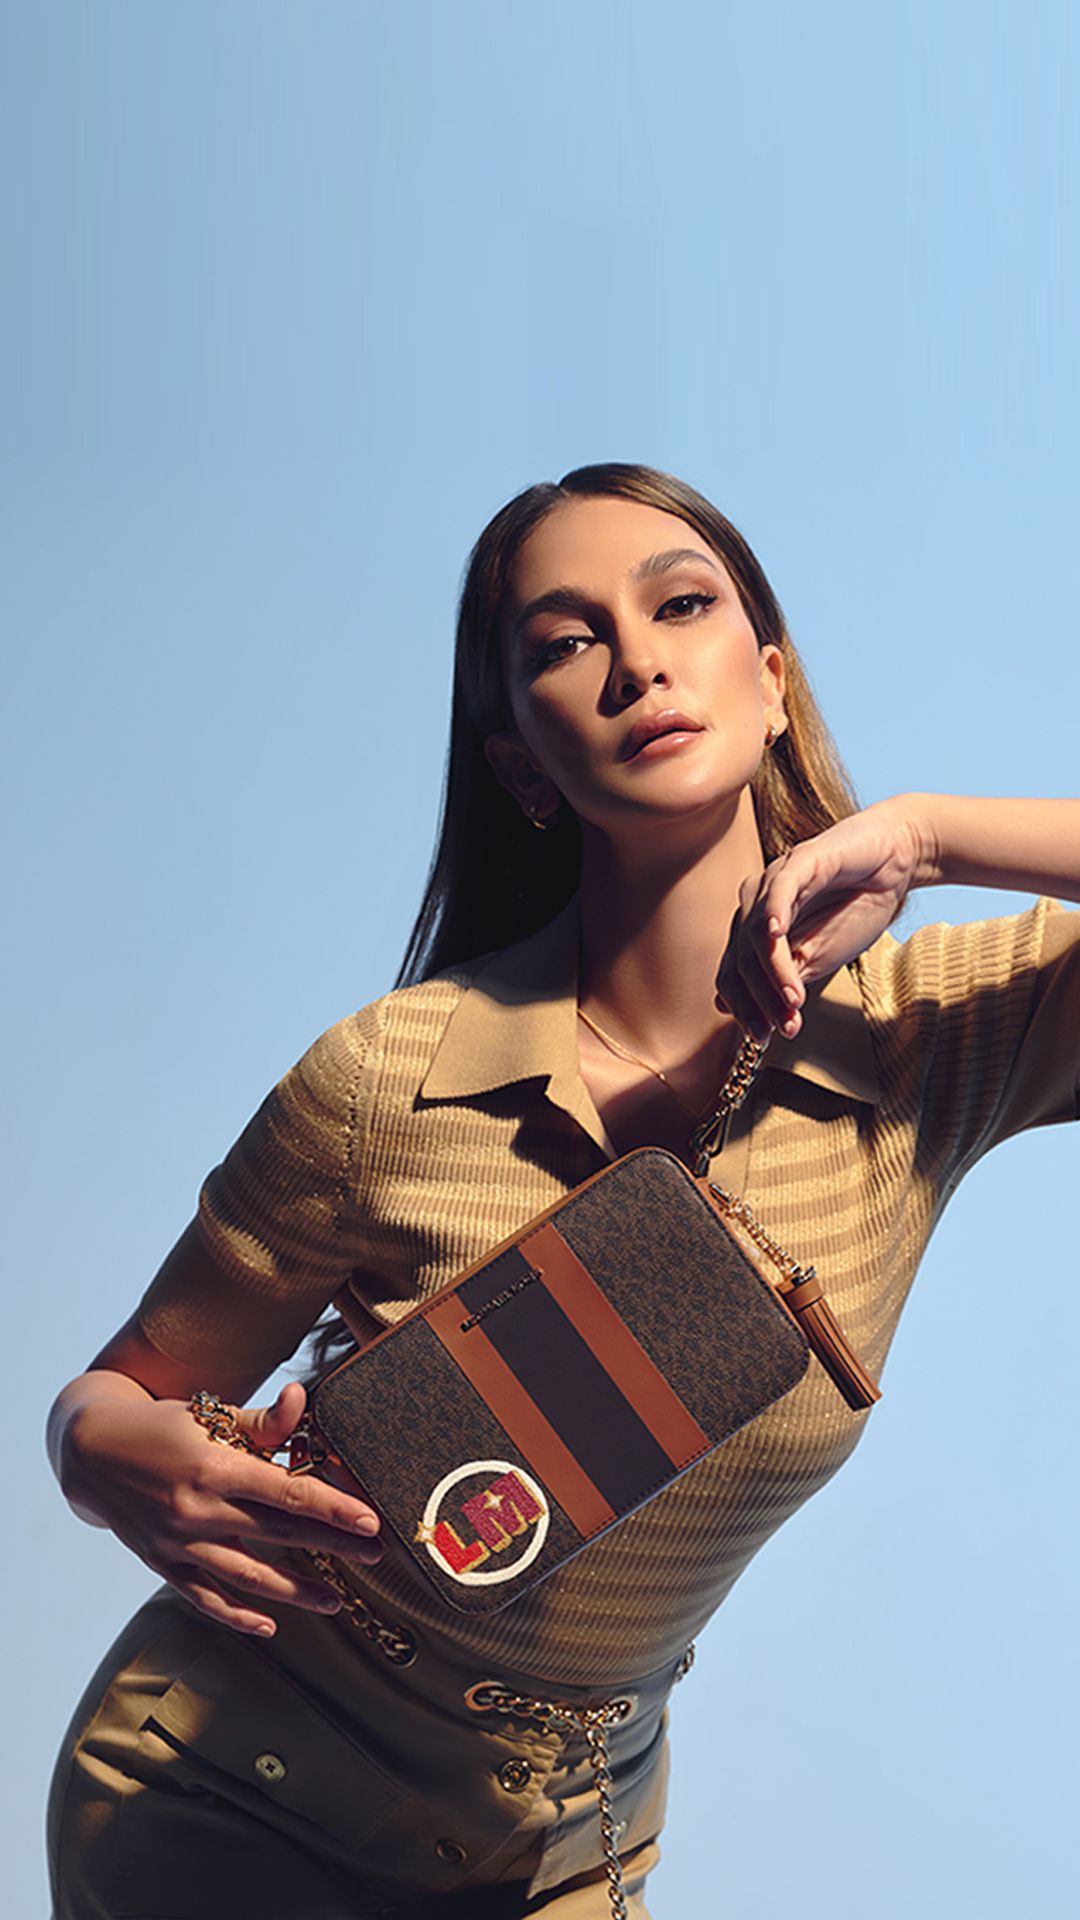 Michael Kors Launches MK MY WAY Global Campaign in Indonesia